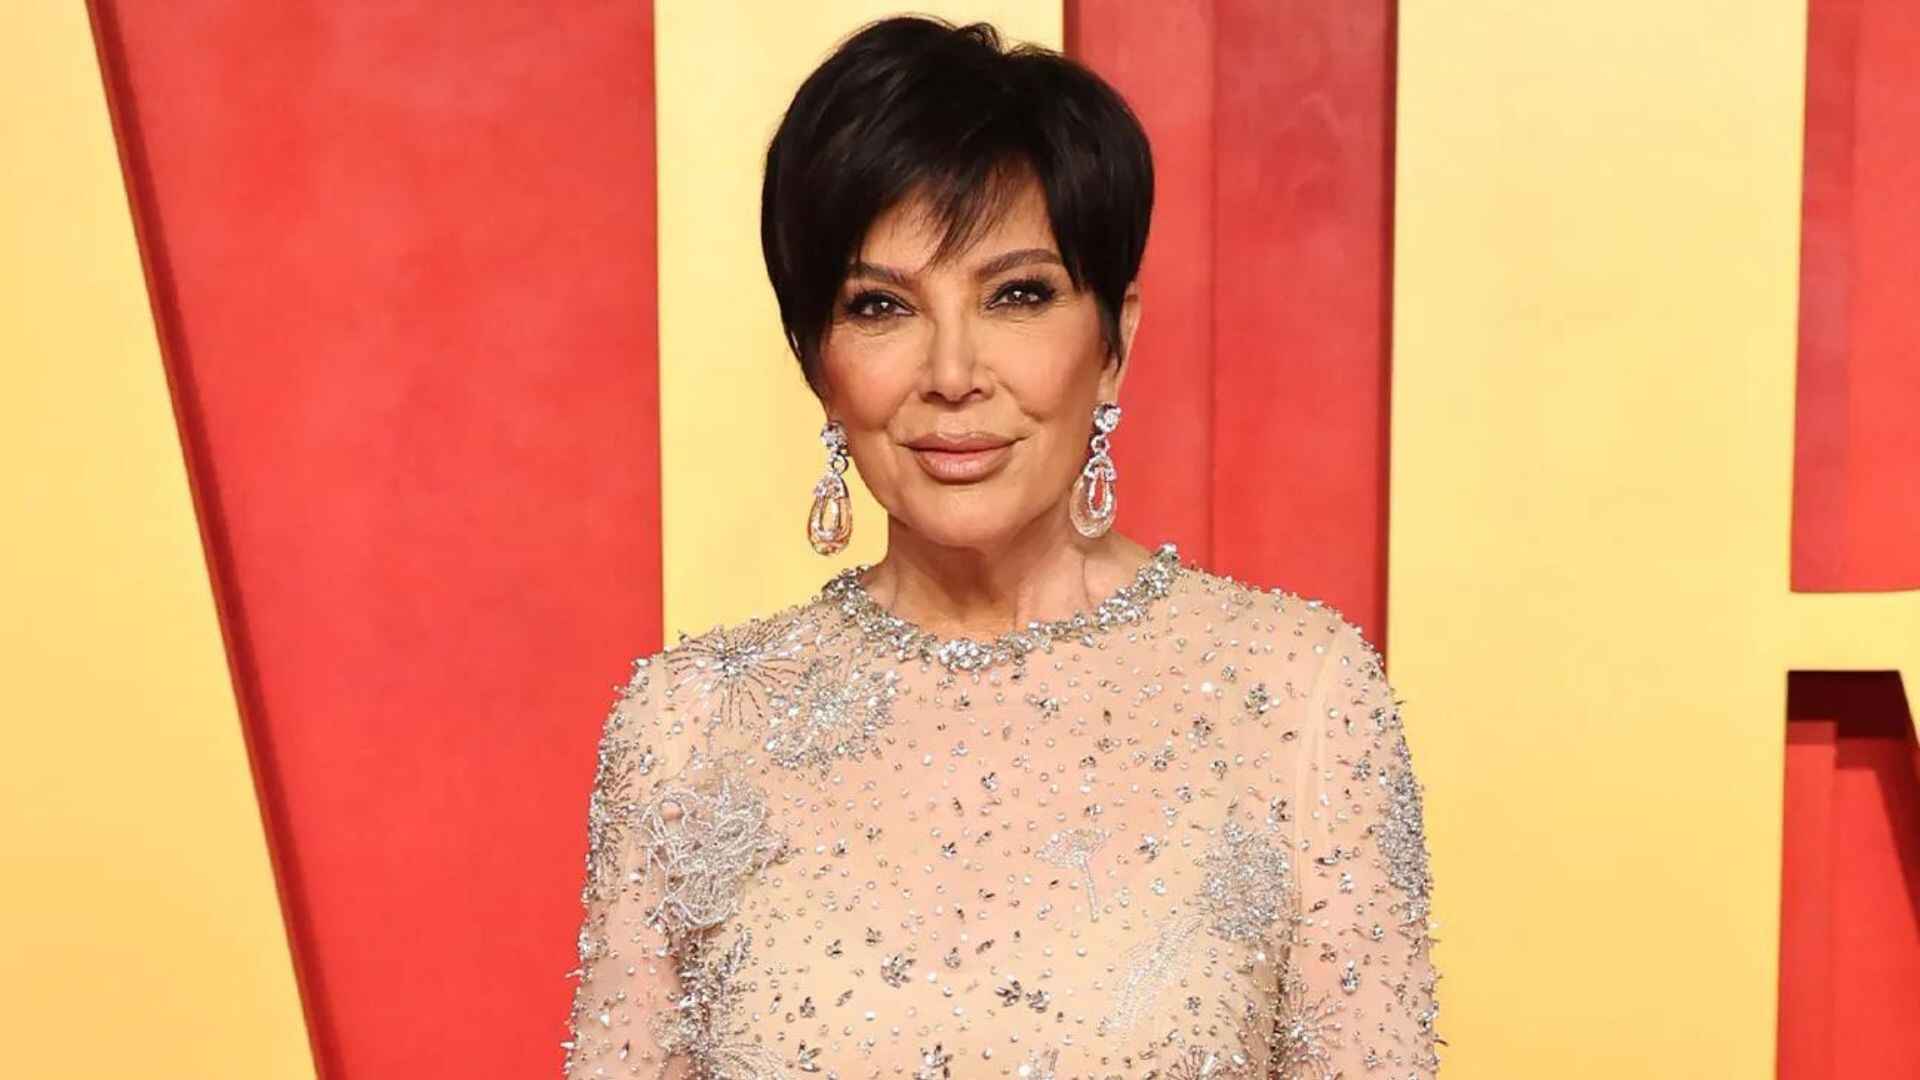 Kris Jenner Opens Up About Ovary Removal Surgery Following Tumor Diagnosis